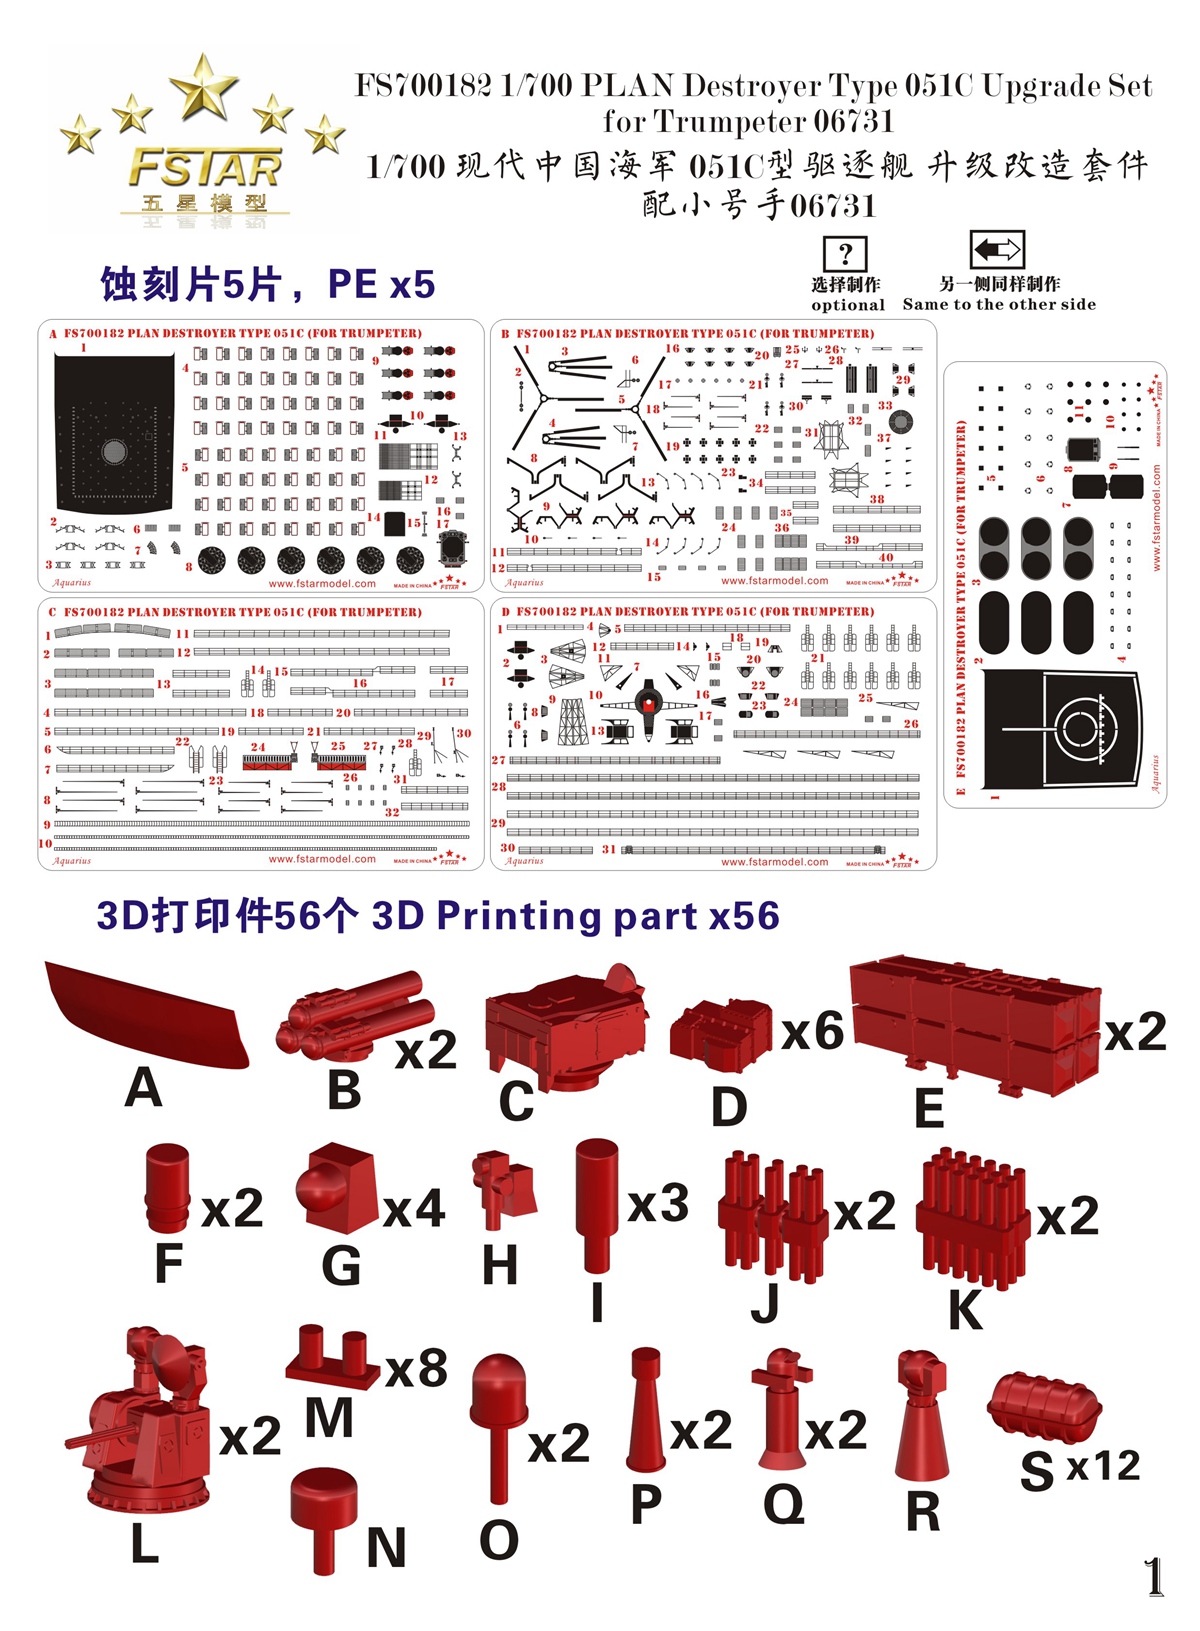 1/700 PLAN Type 051C Destroyer Upgrade Set for Trumpeter 06731 - Click Image to Close